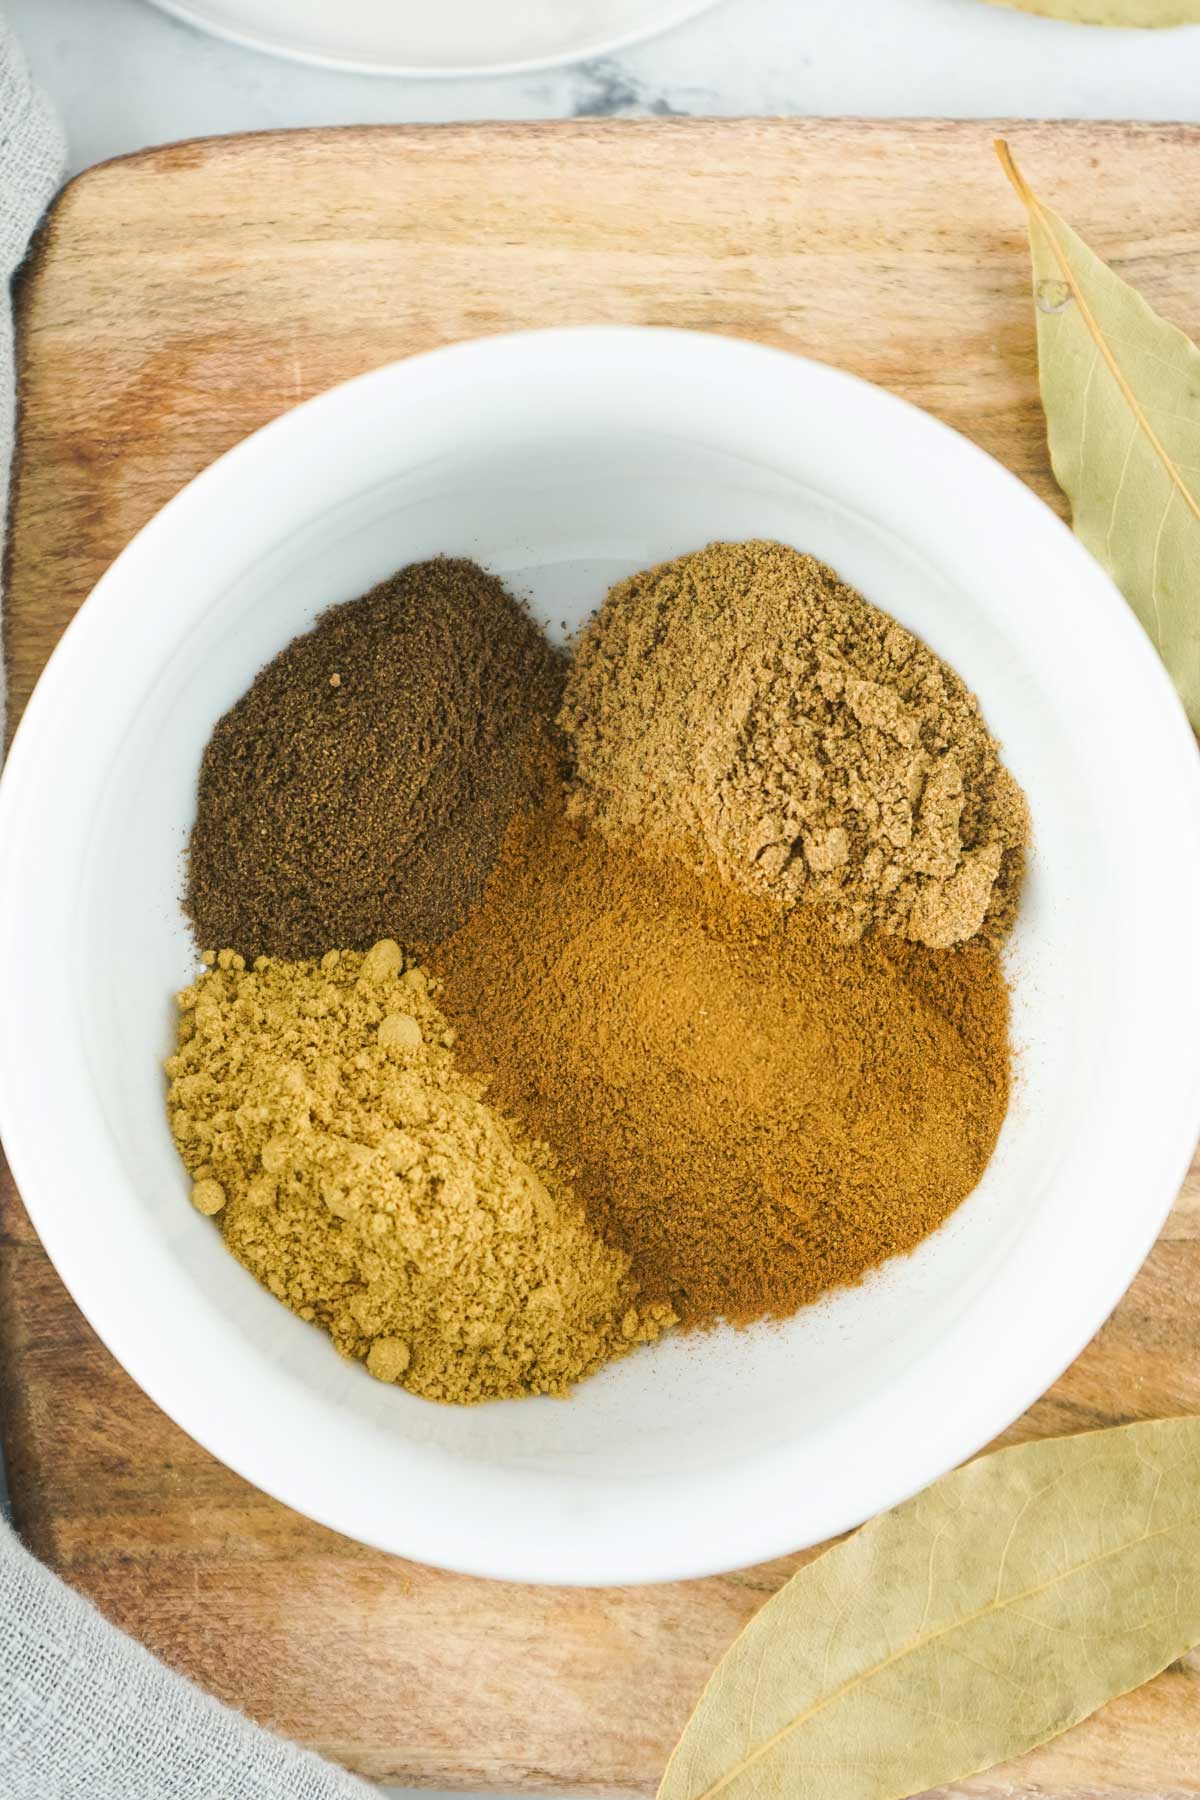 The first proces of making Pumpkin Pie Spice is to add all equal ingredients such as ground cinnamon, ground ginger, ground nutmeg and ground allspice in a bowl.